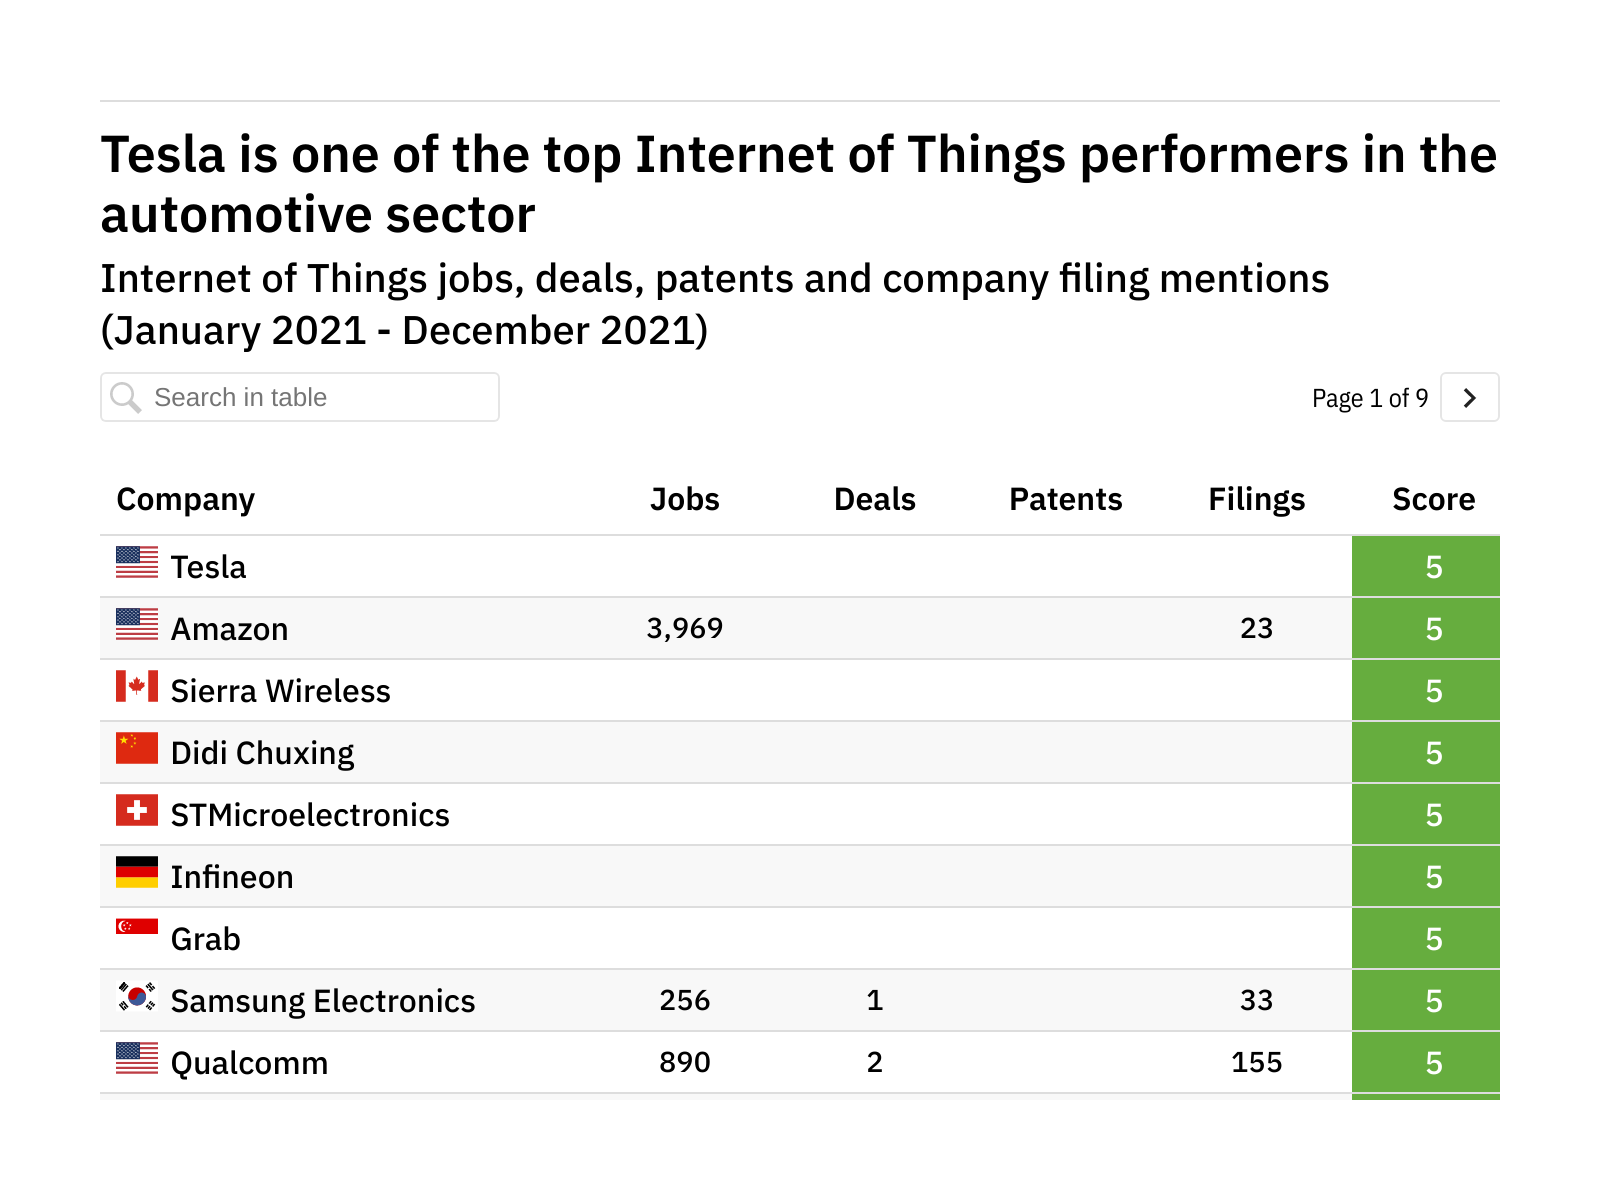 Revealed: The companies best positioned to benefit from future Internet of Things disruption in autos